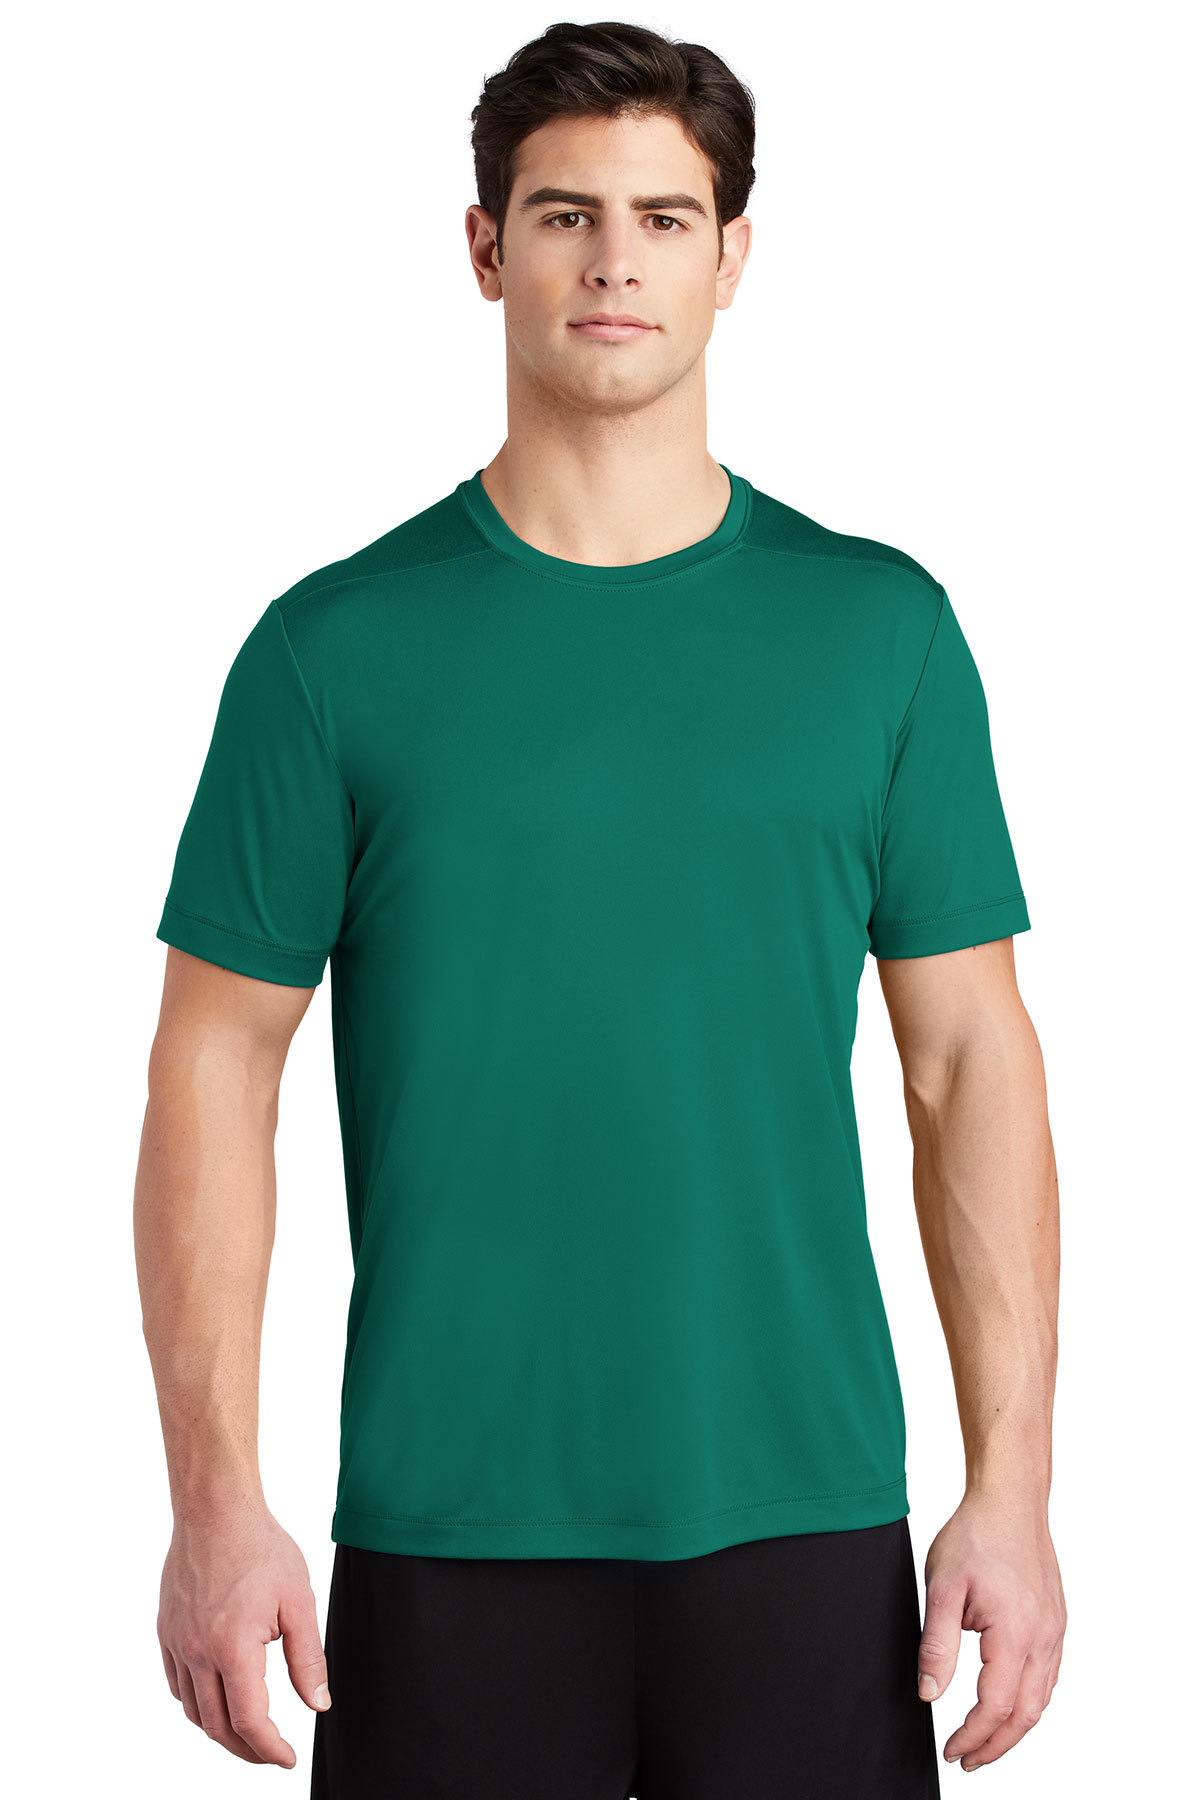 click to view Marine Green